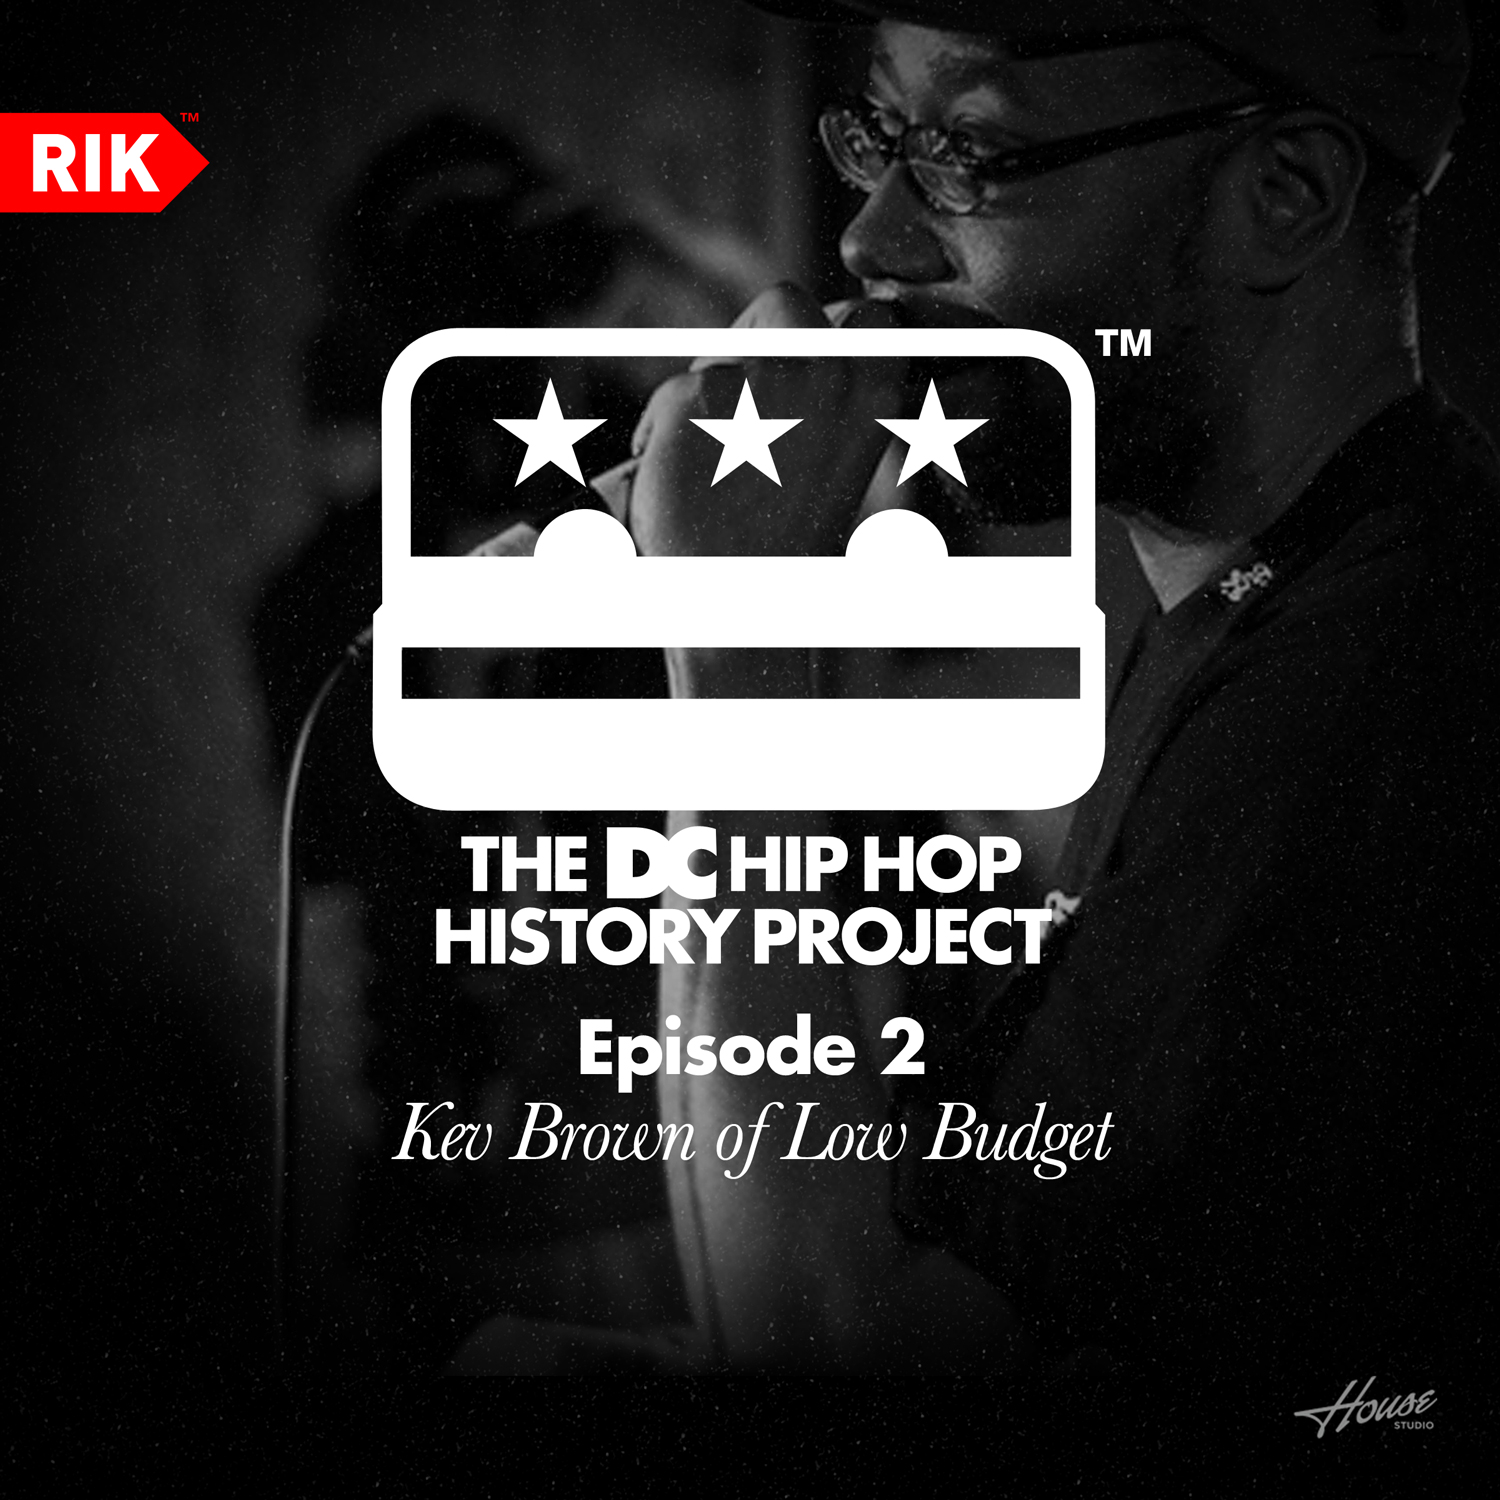 FWMJ's Rappers I Know presents The DC Hip Hop History Project